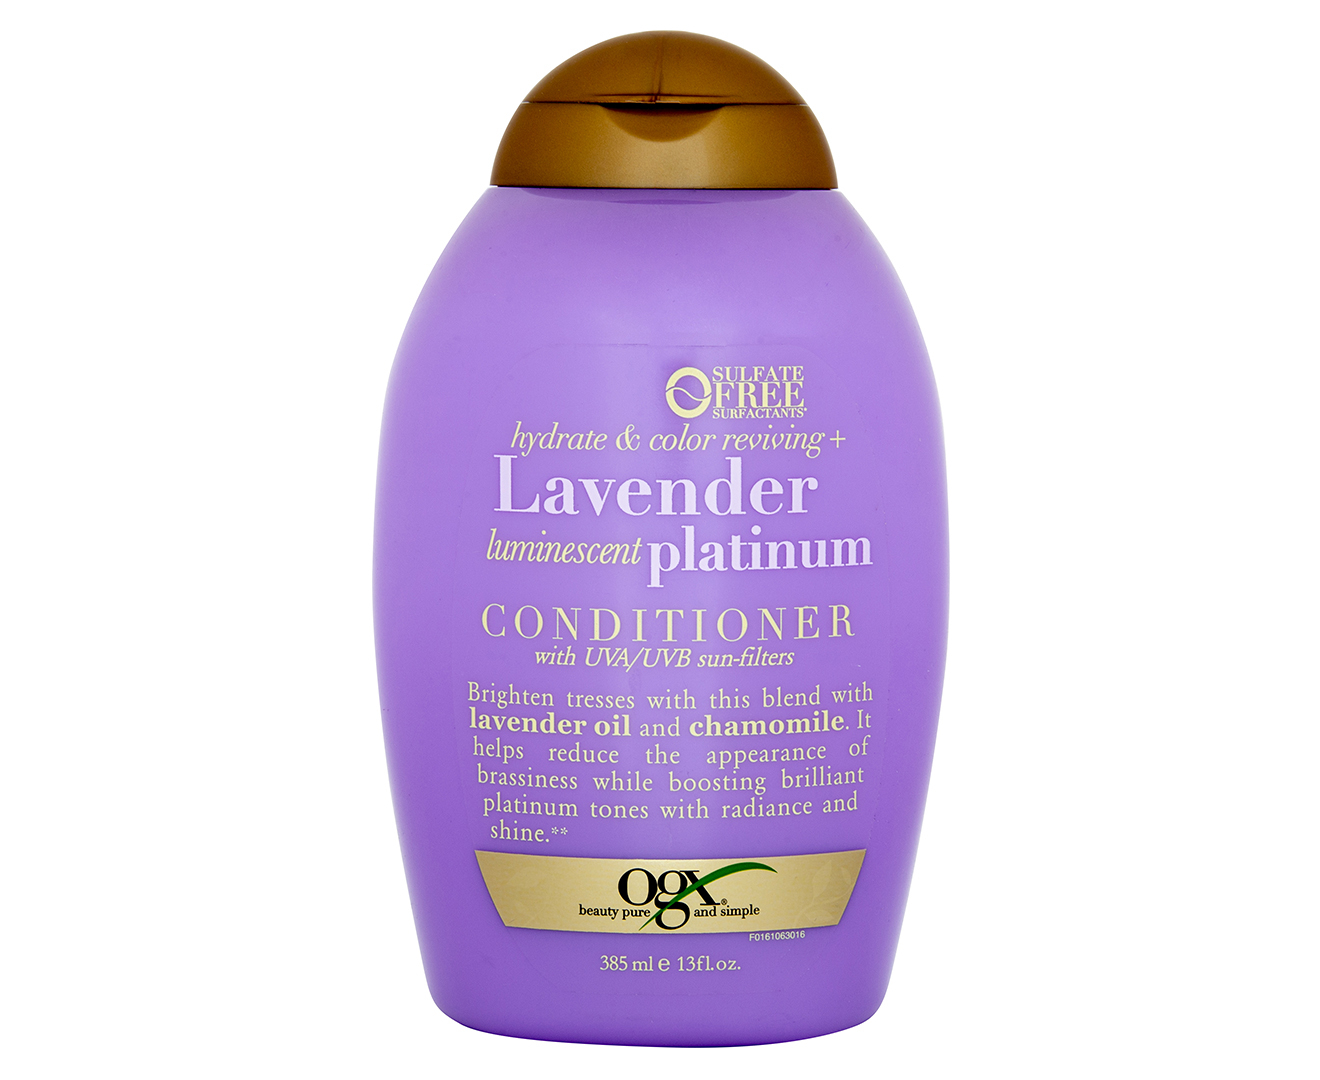 6. OGX Hydrate & Color Reviving + Lavender Luminescent Platinum Shampoo - wide 8